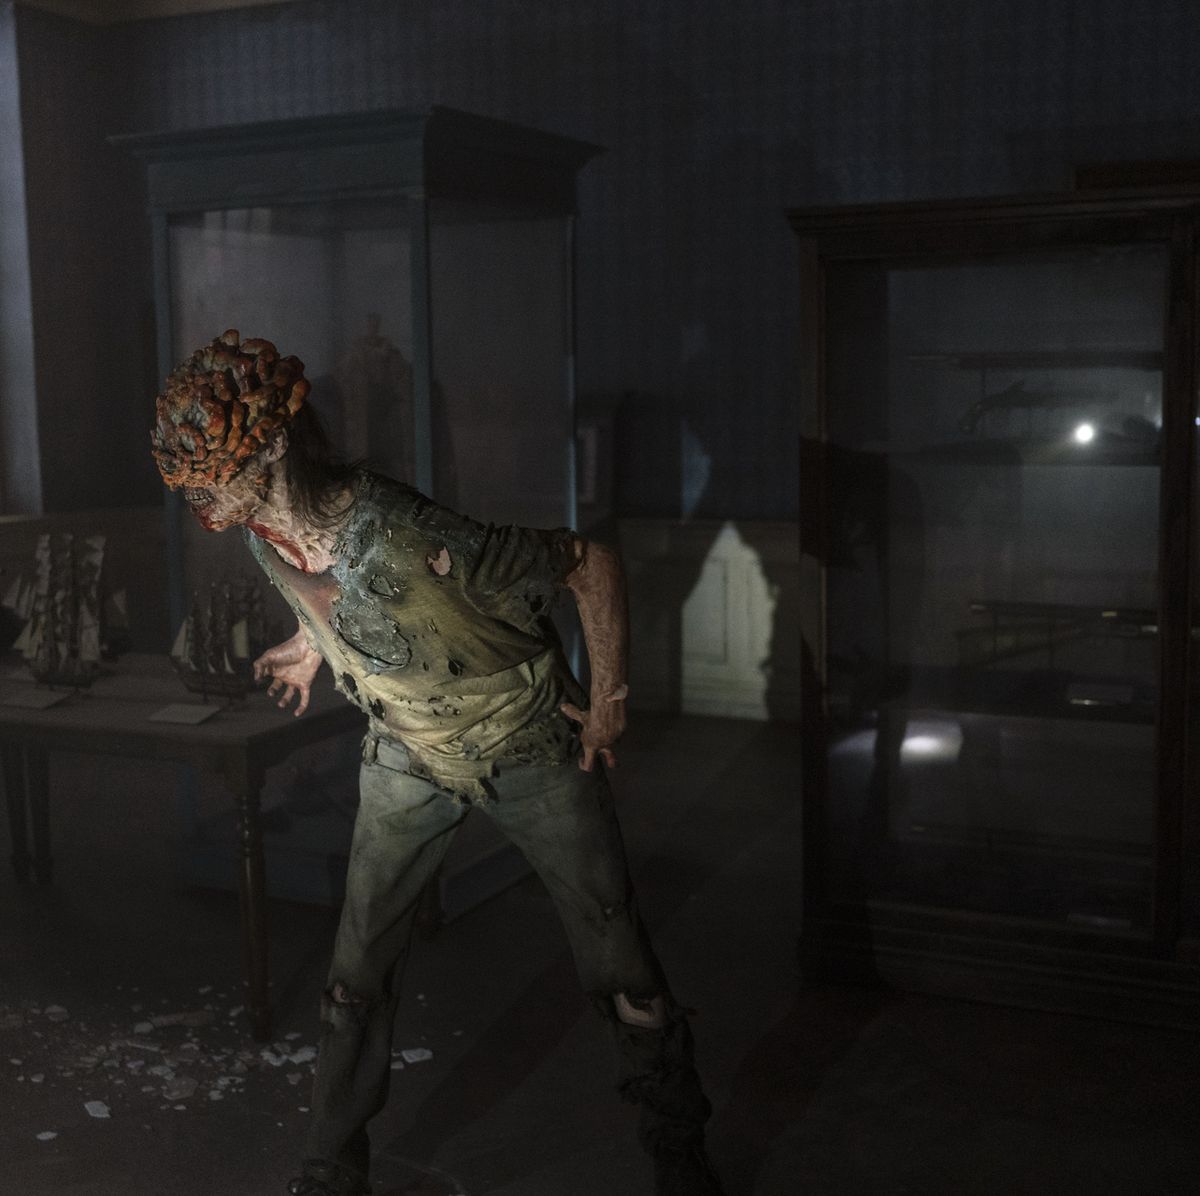 The Last of Us: A terrifying exhibition of a brutal apocalypse